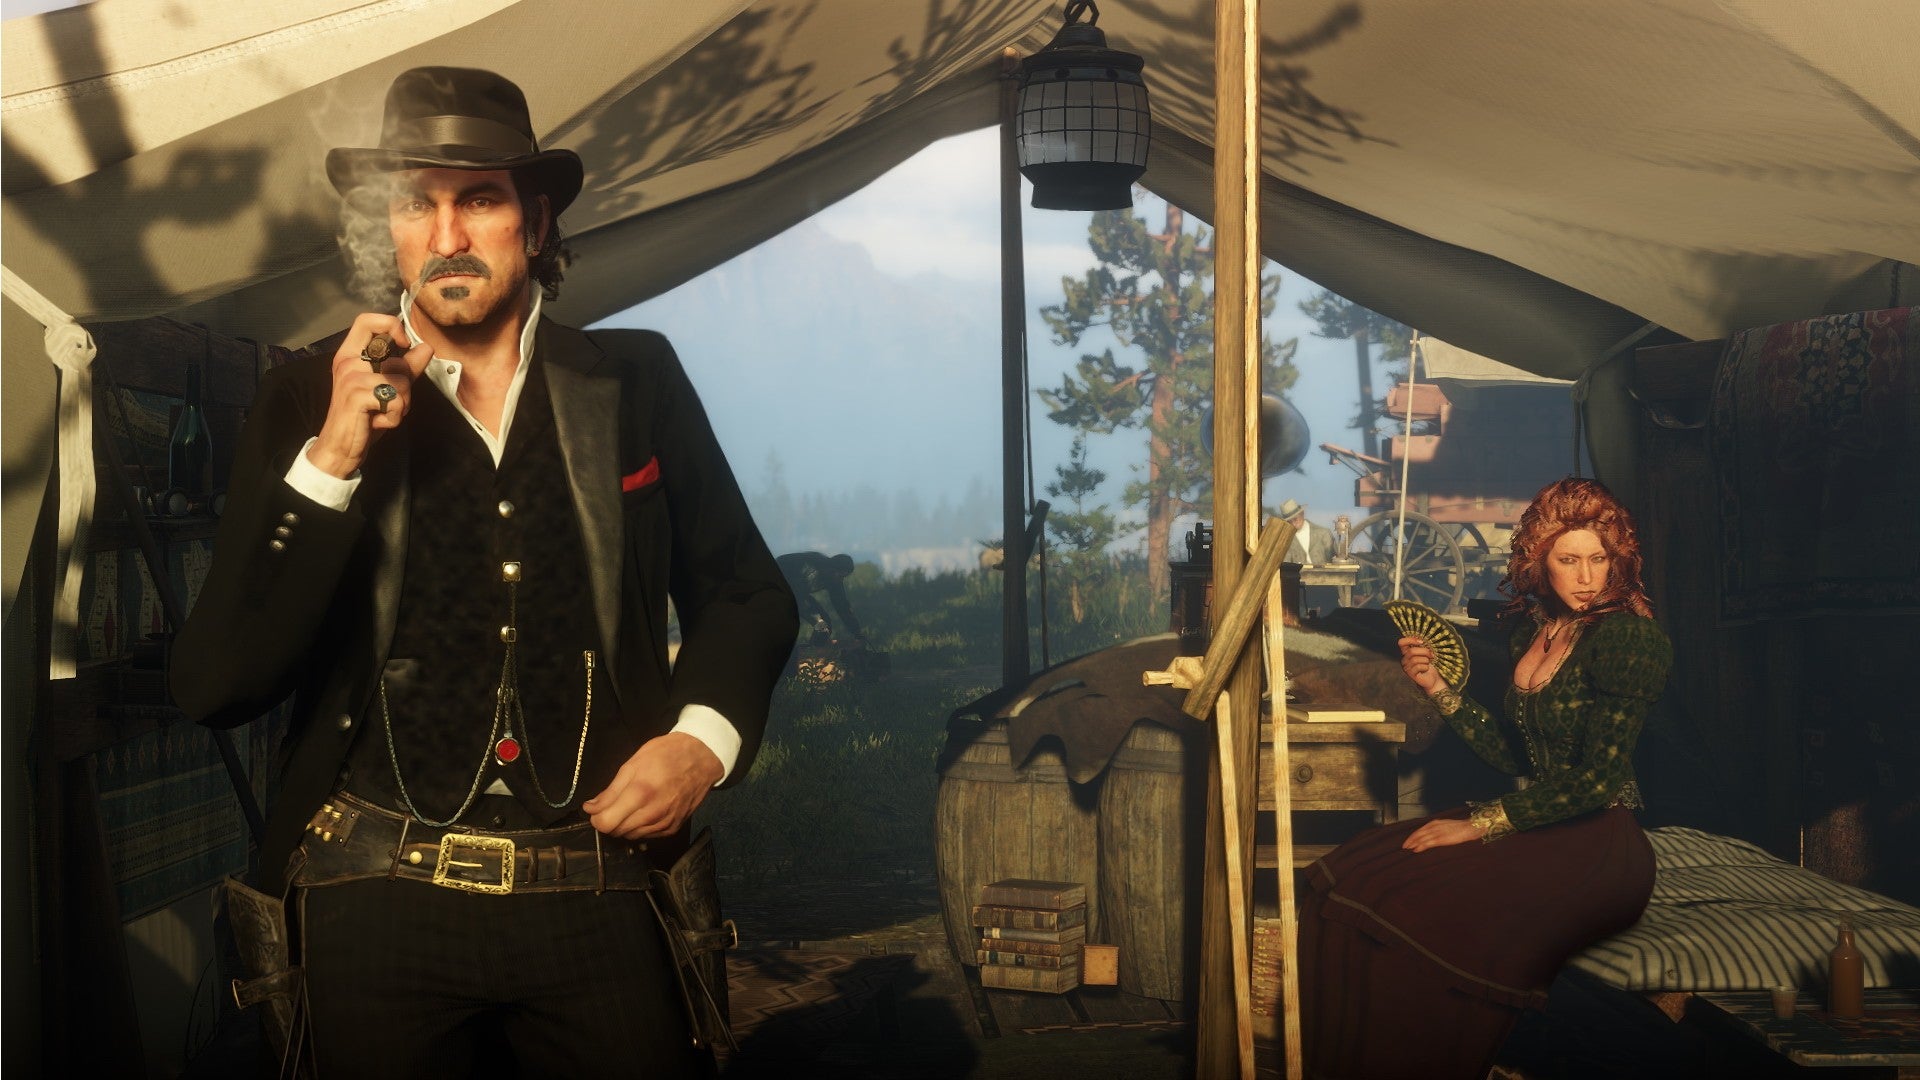 Red Dead Redemption 2 screenshot showing Dutch smoking a cigarette in the opening of a tent.